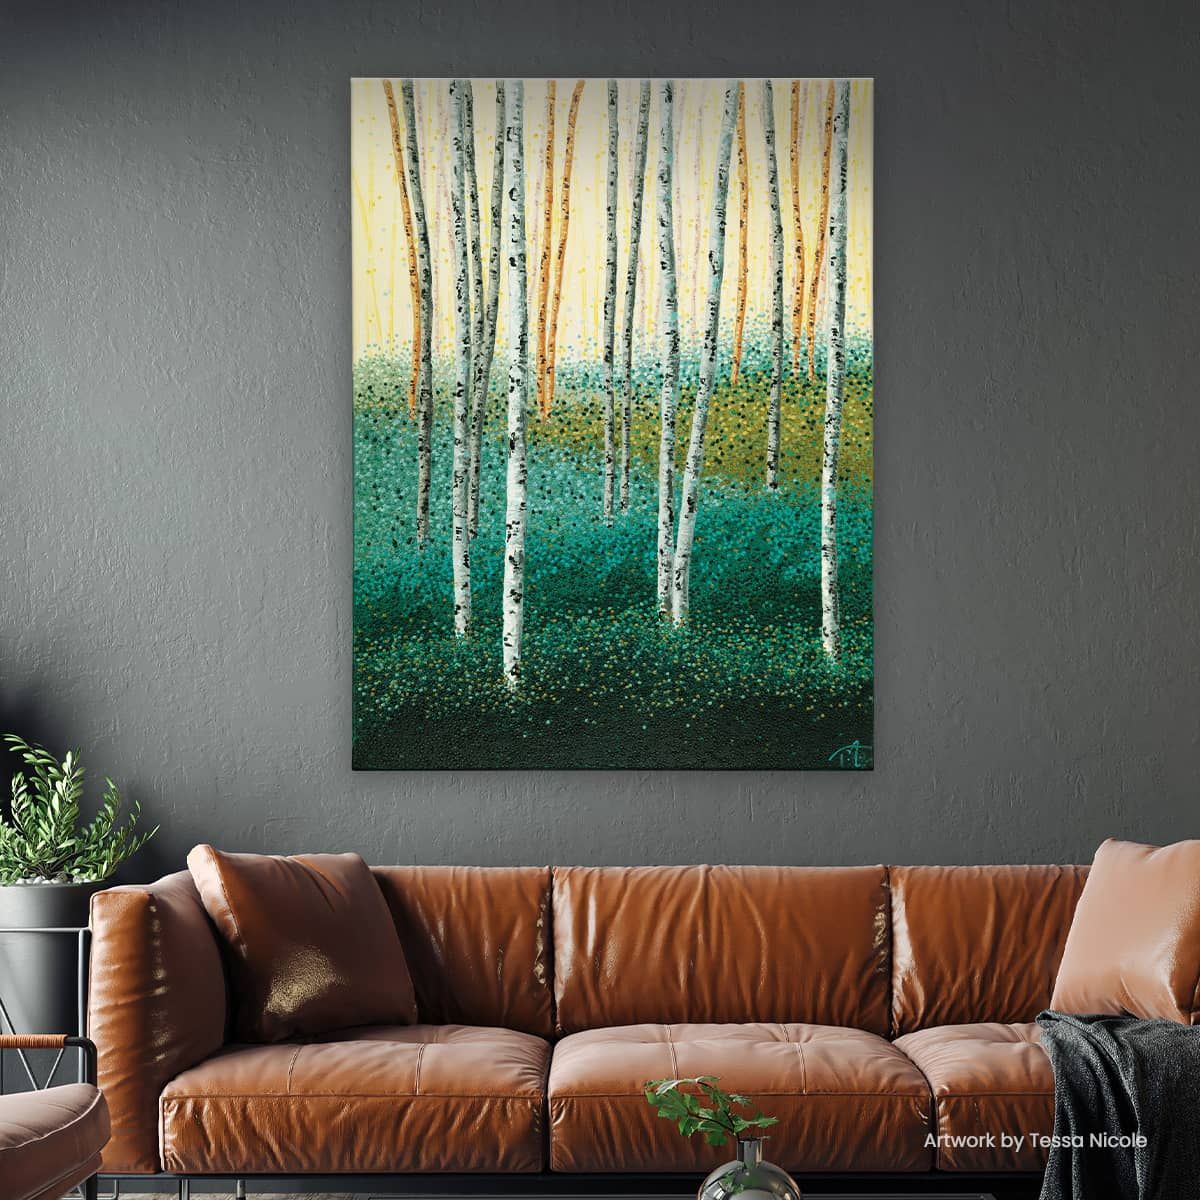 Perfect for Large Oil Paintings! Artwork by Tessa Nicole Smith